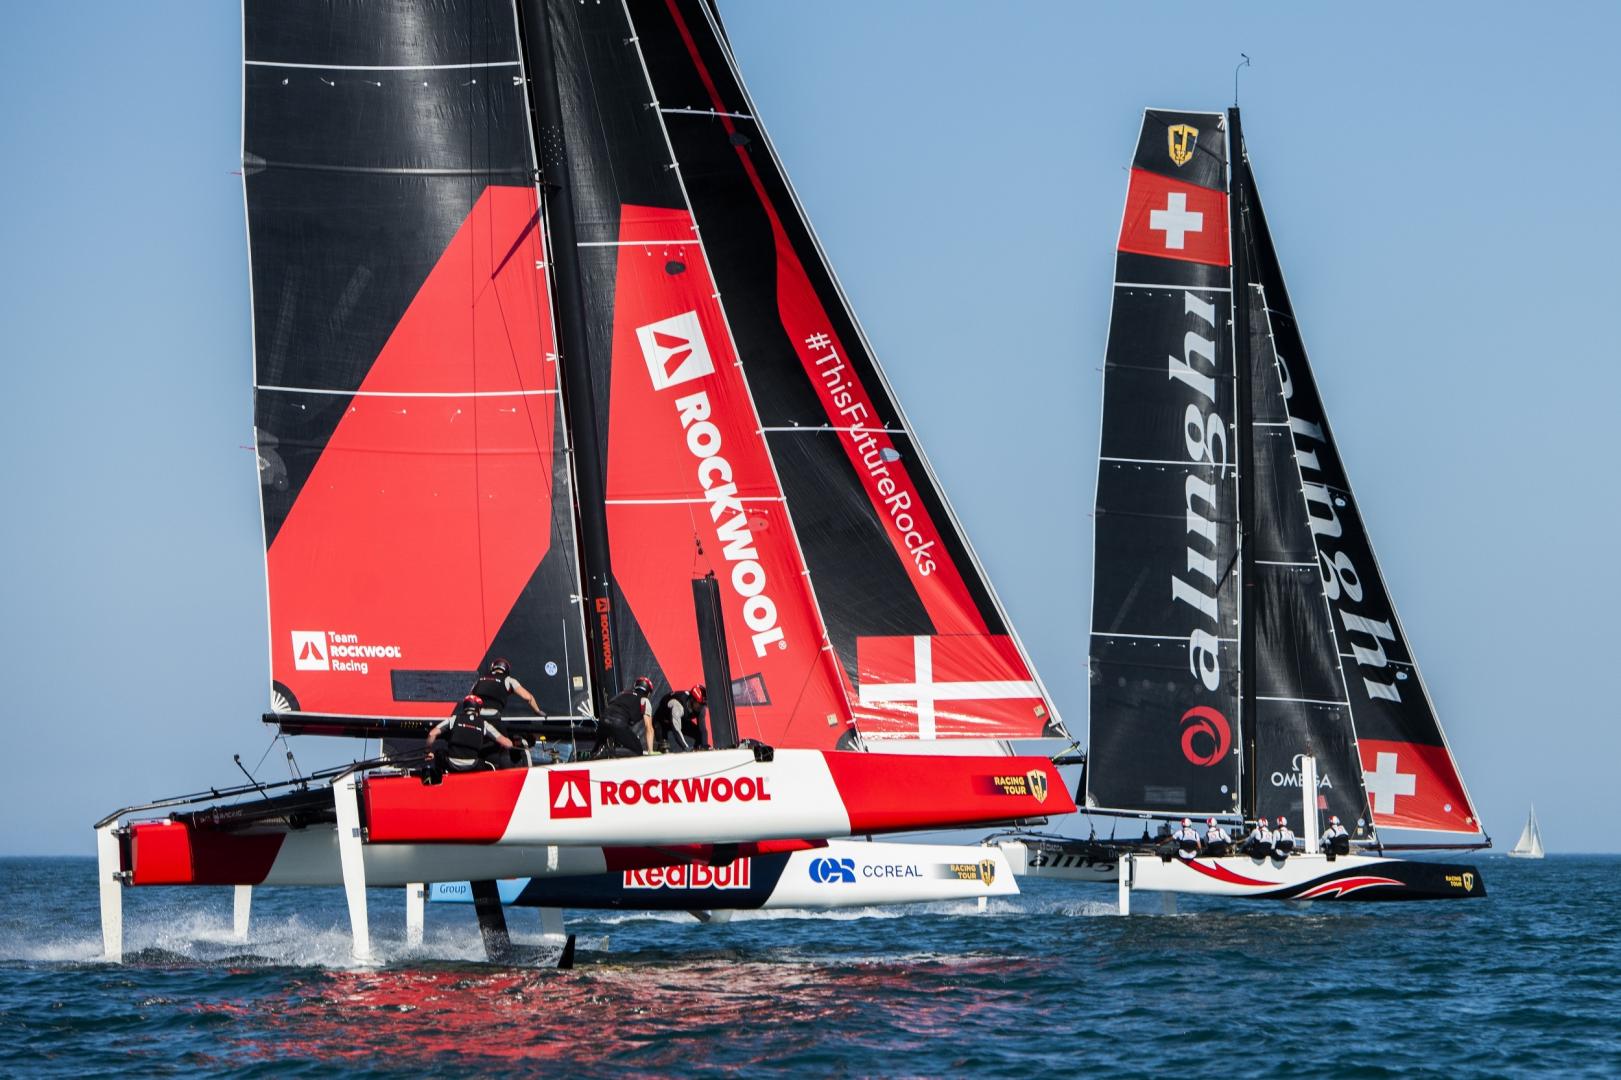 Alinghi leads Red Bull Sailing Team and Team Rockwool Racing down the reach.